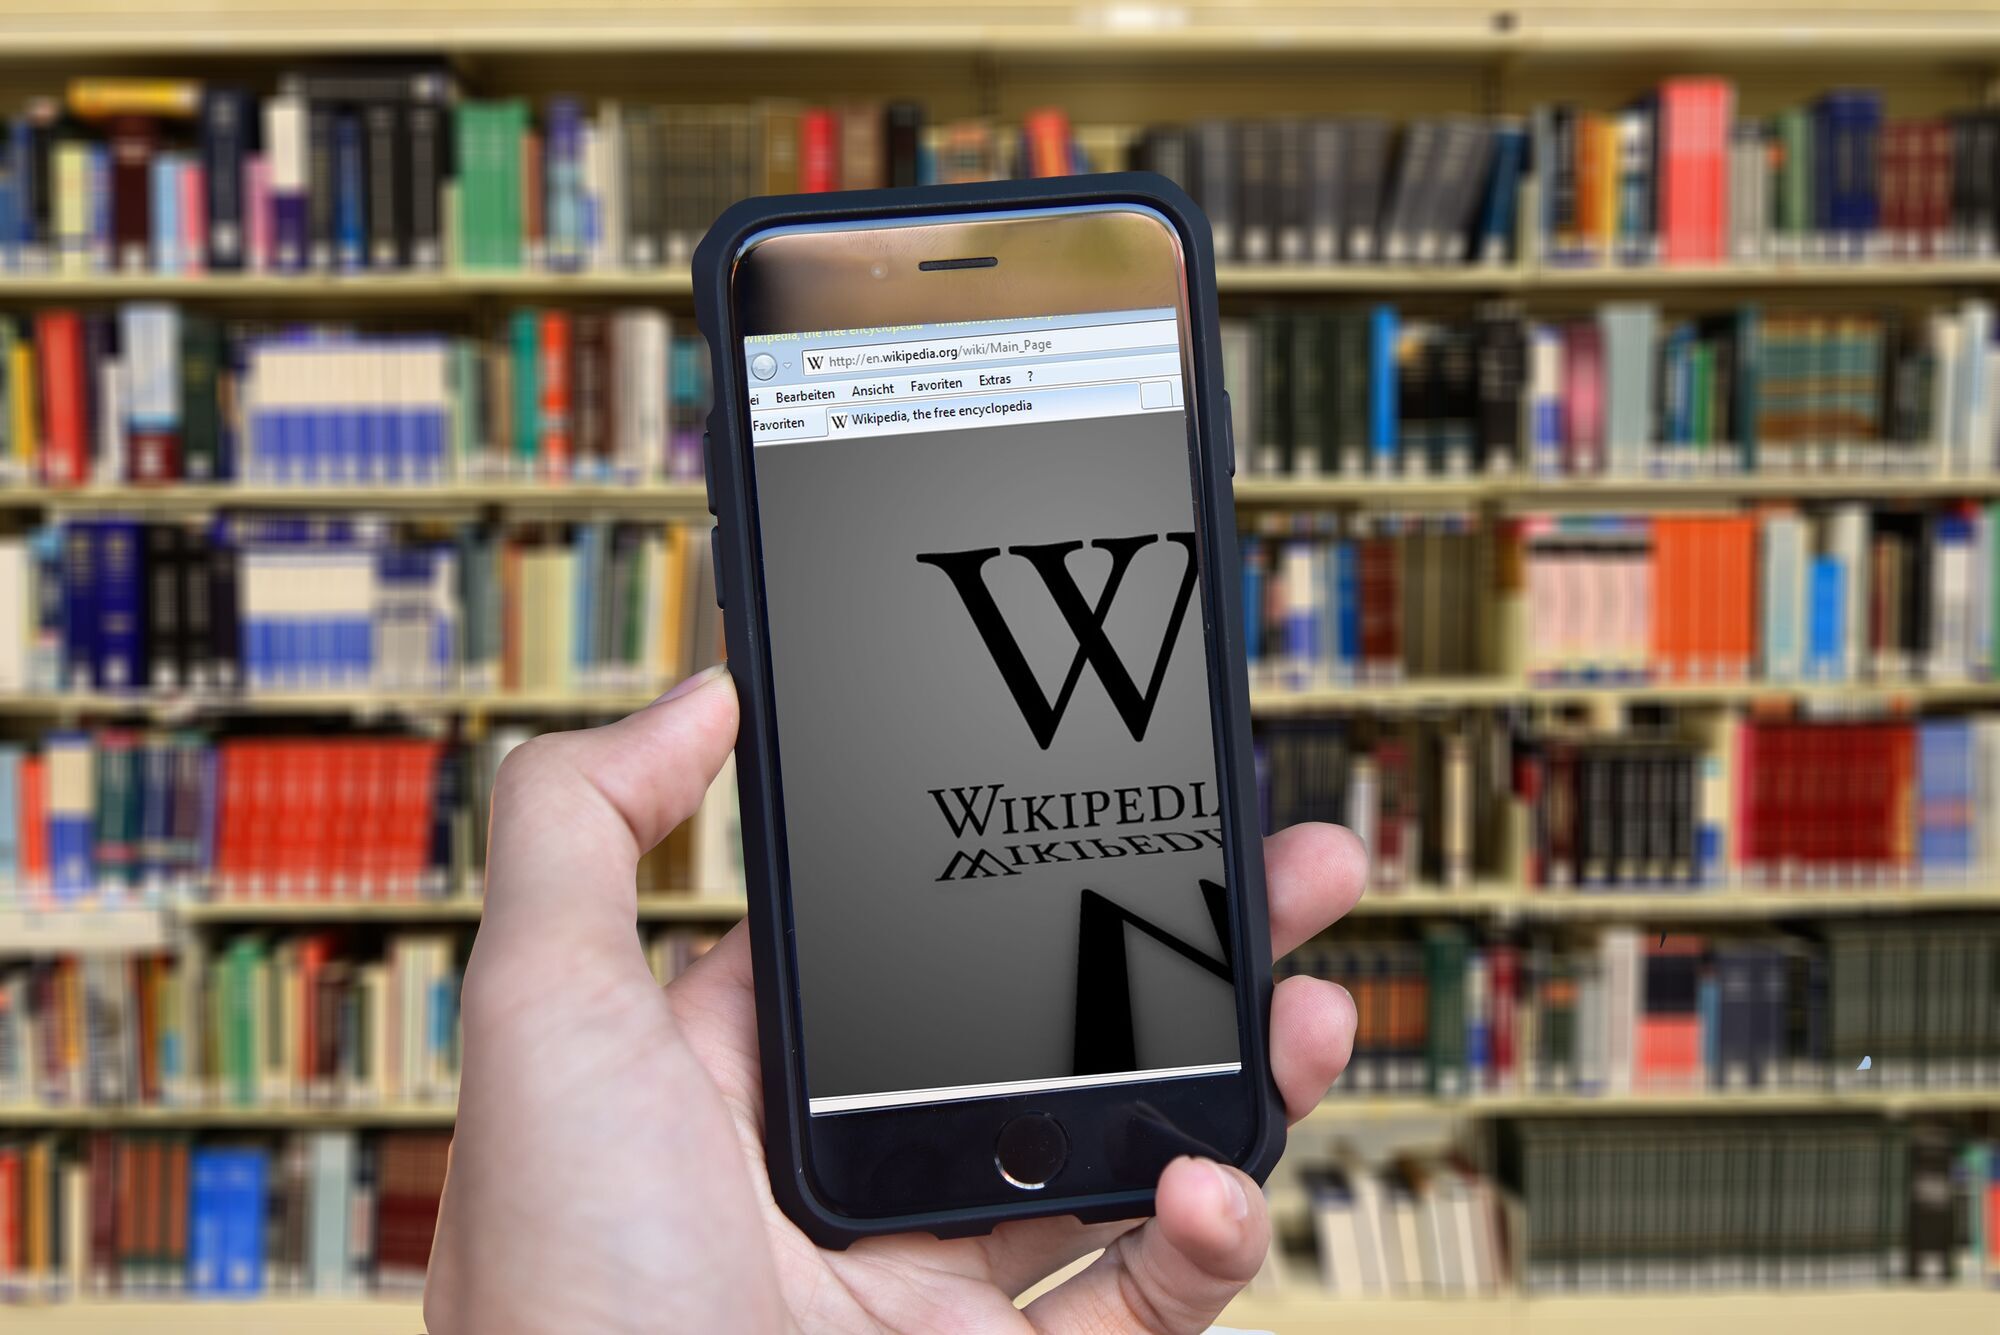 ''Wikipedia is considered to be the largest and most popular online reference book